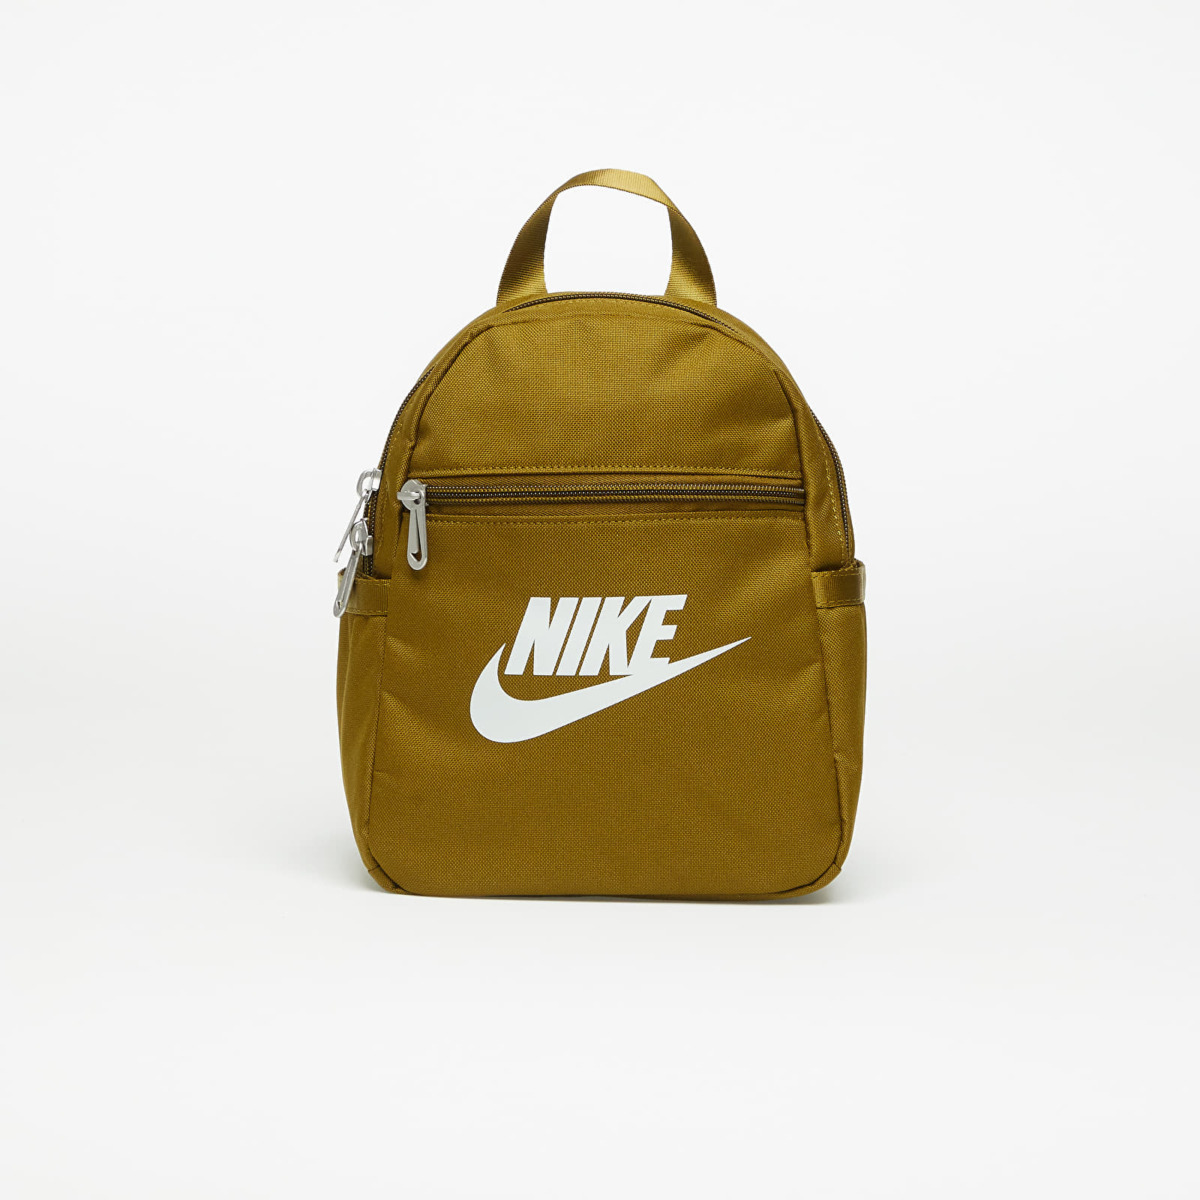 Nike Woman Backpack in Olive from Footshop GOOFASH